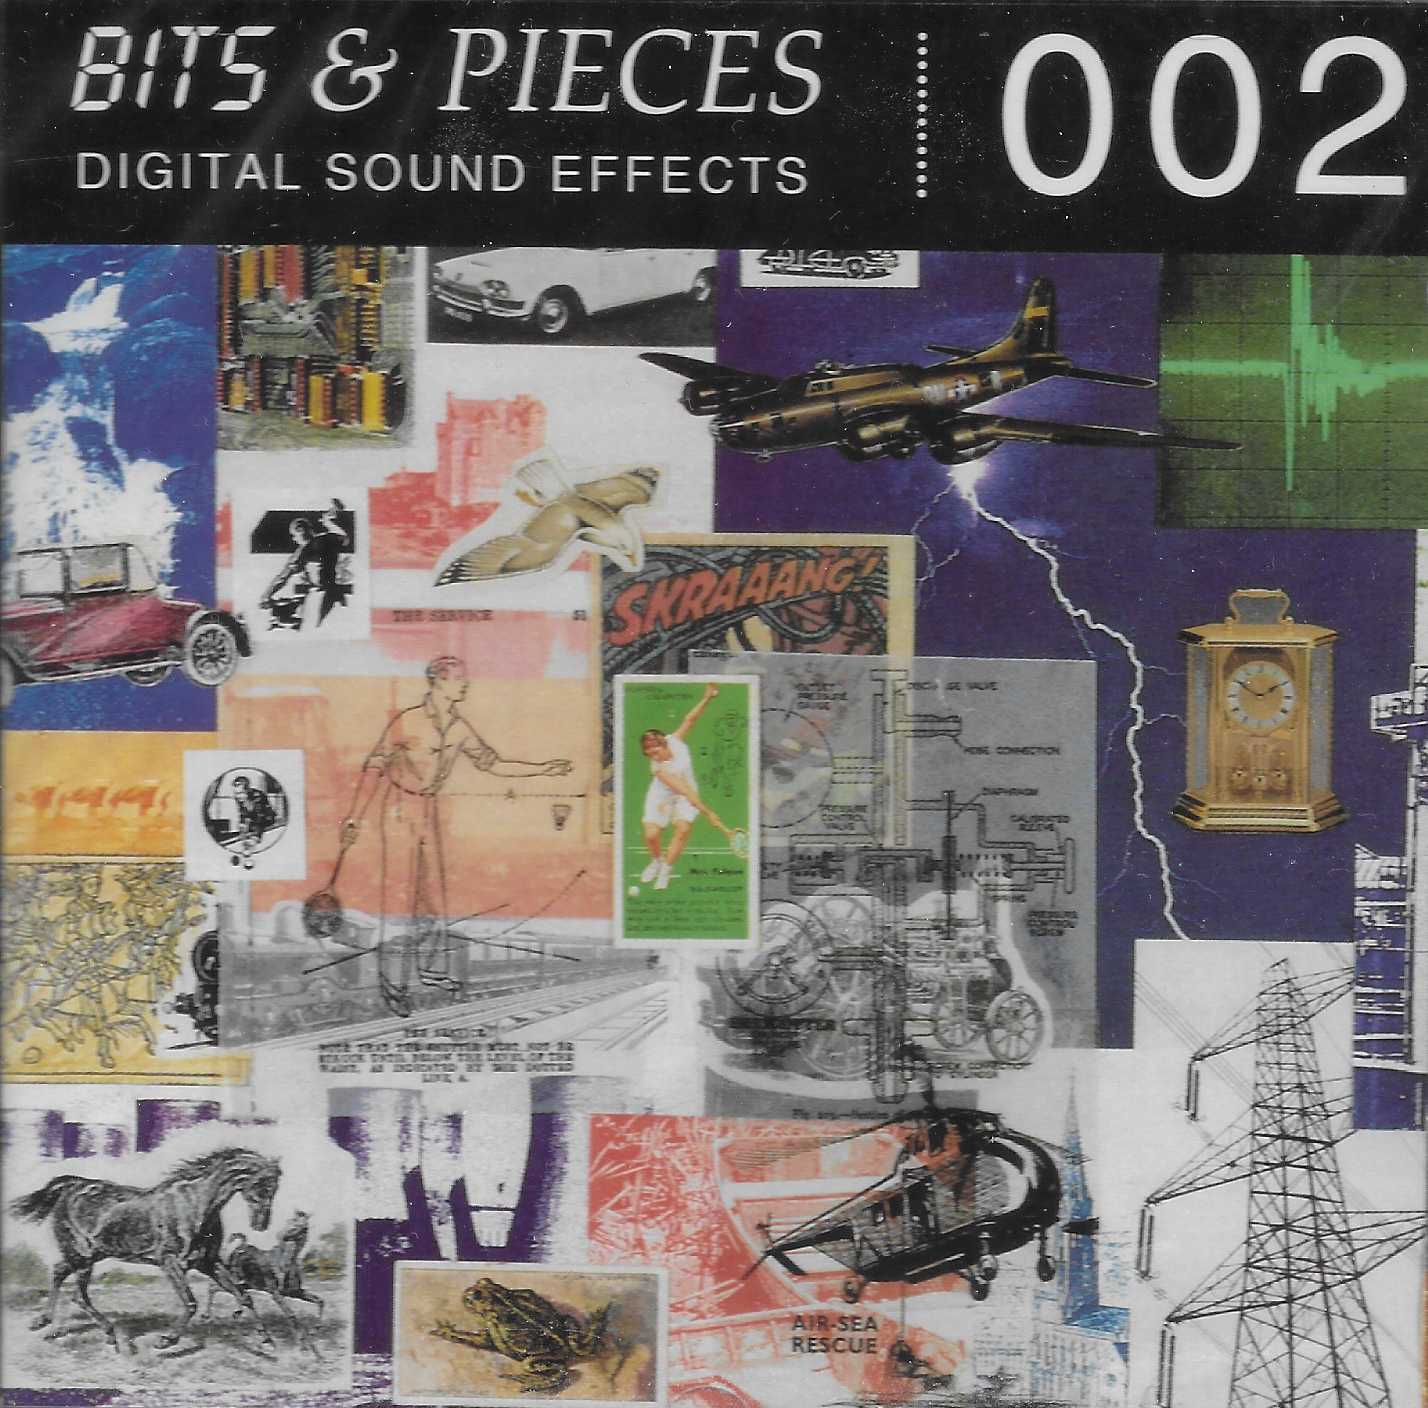 Picture of Bits & pieces digital sound effects 002 by artist Various from ITV, Channel 4 and Channel 5 cds library